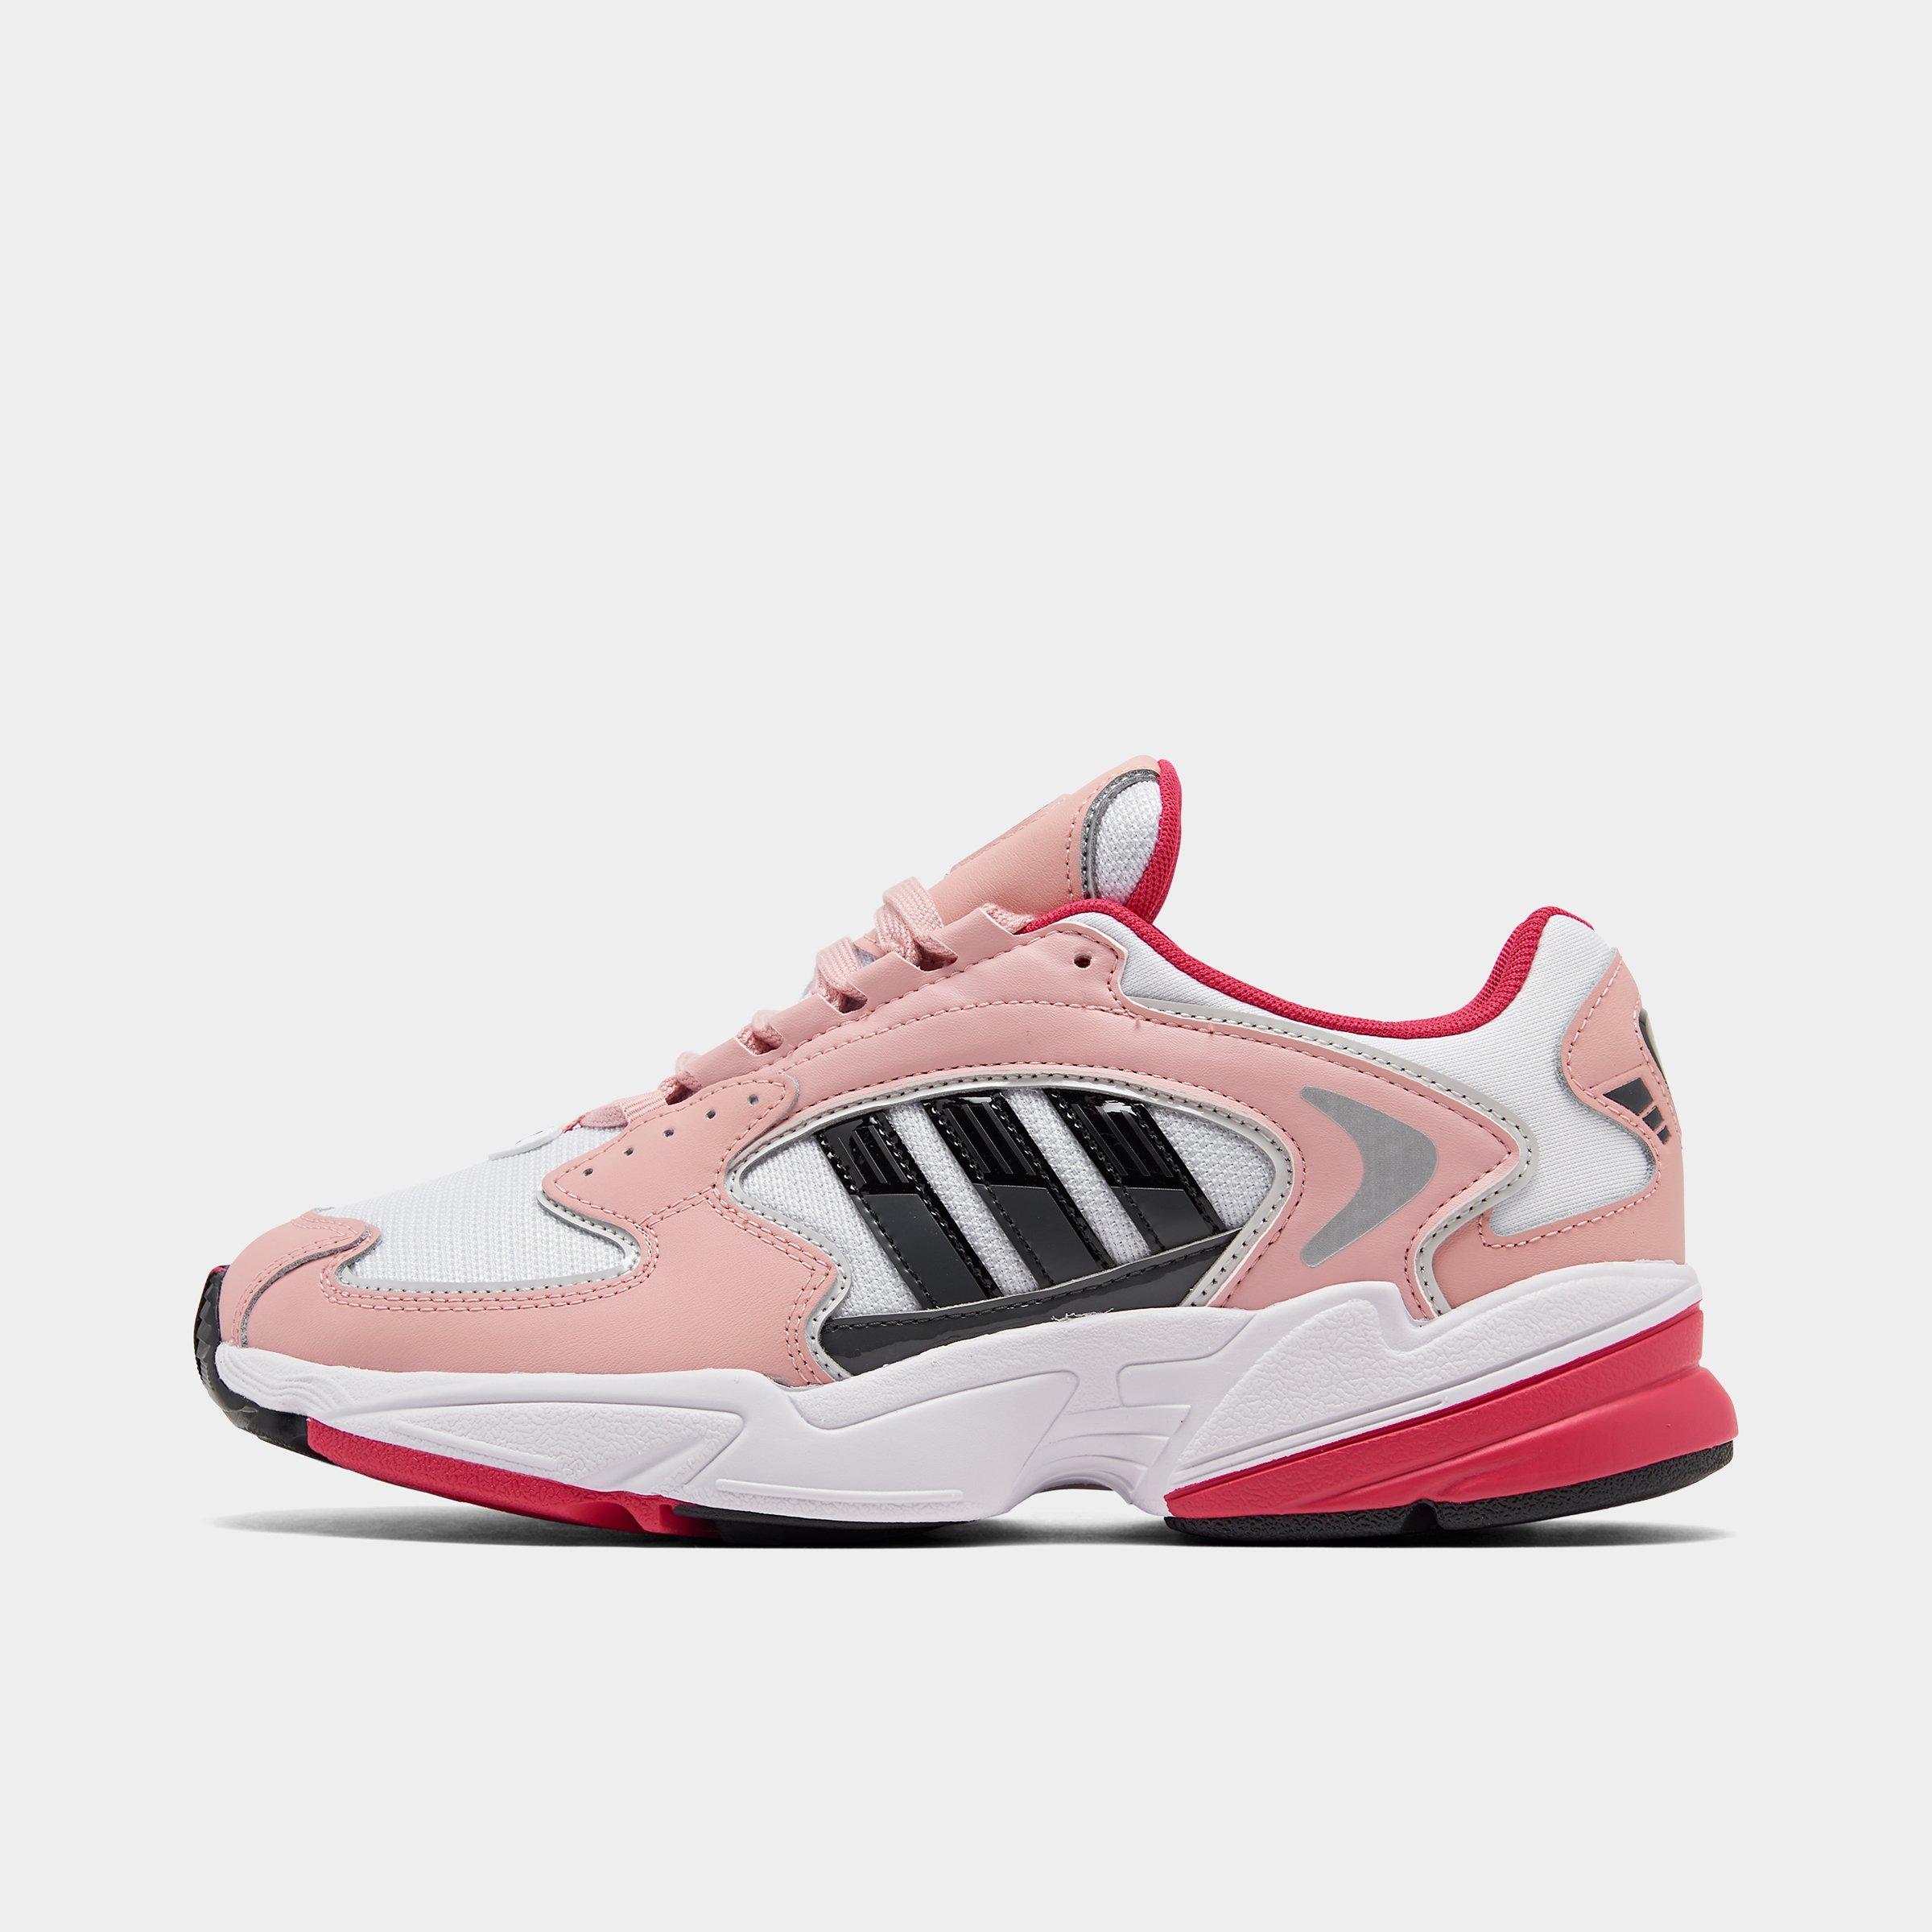 adidas women's originals falcon casual sneakers from finish line